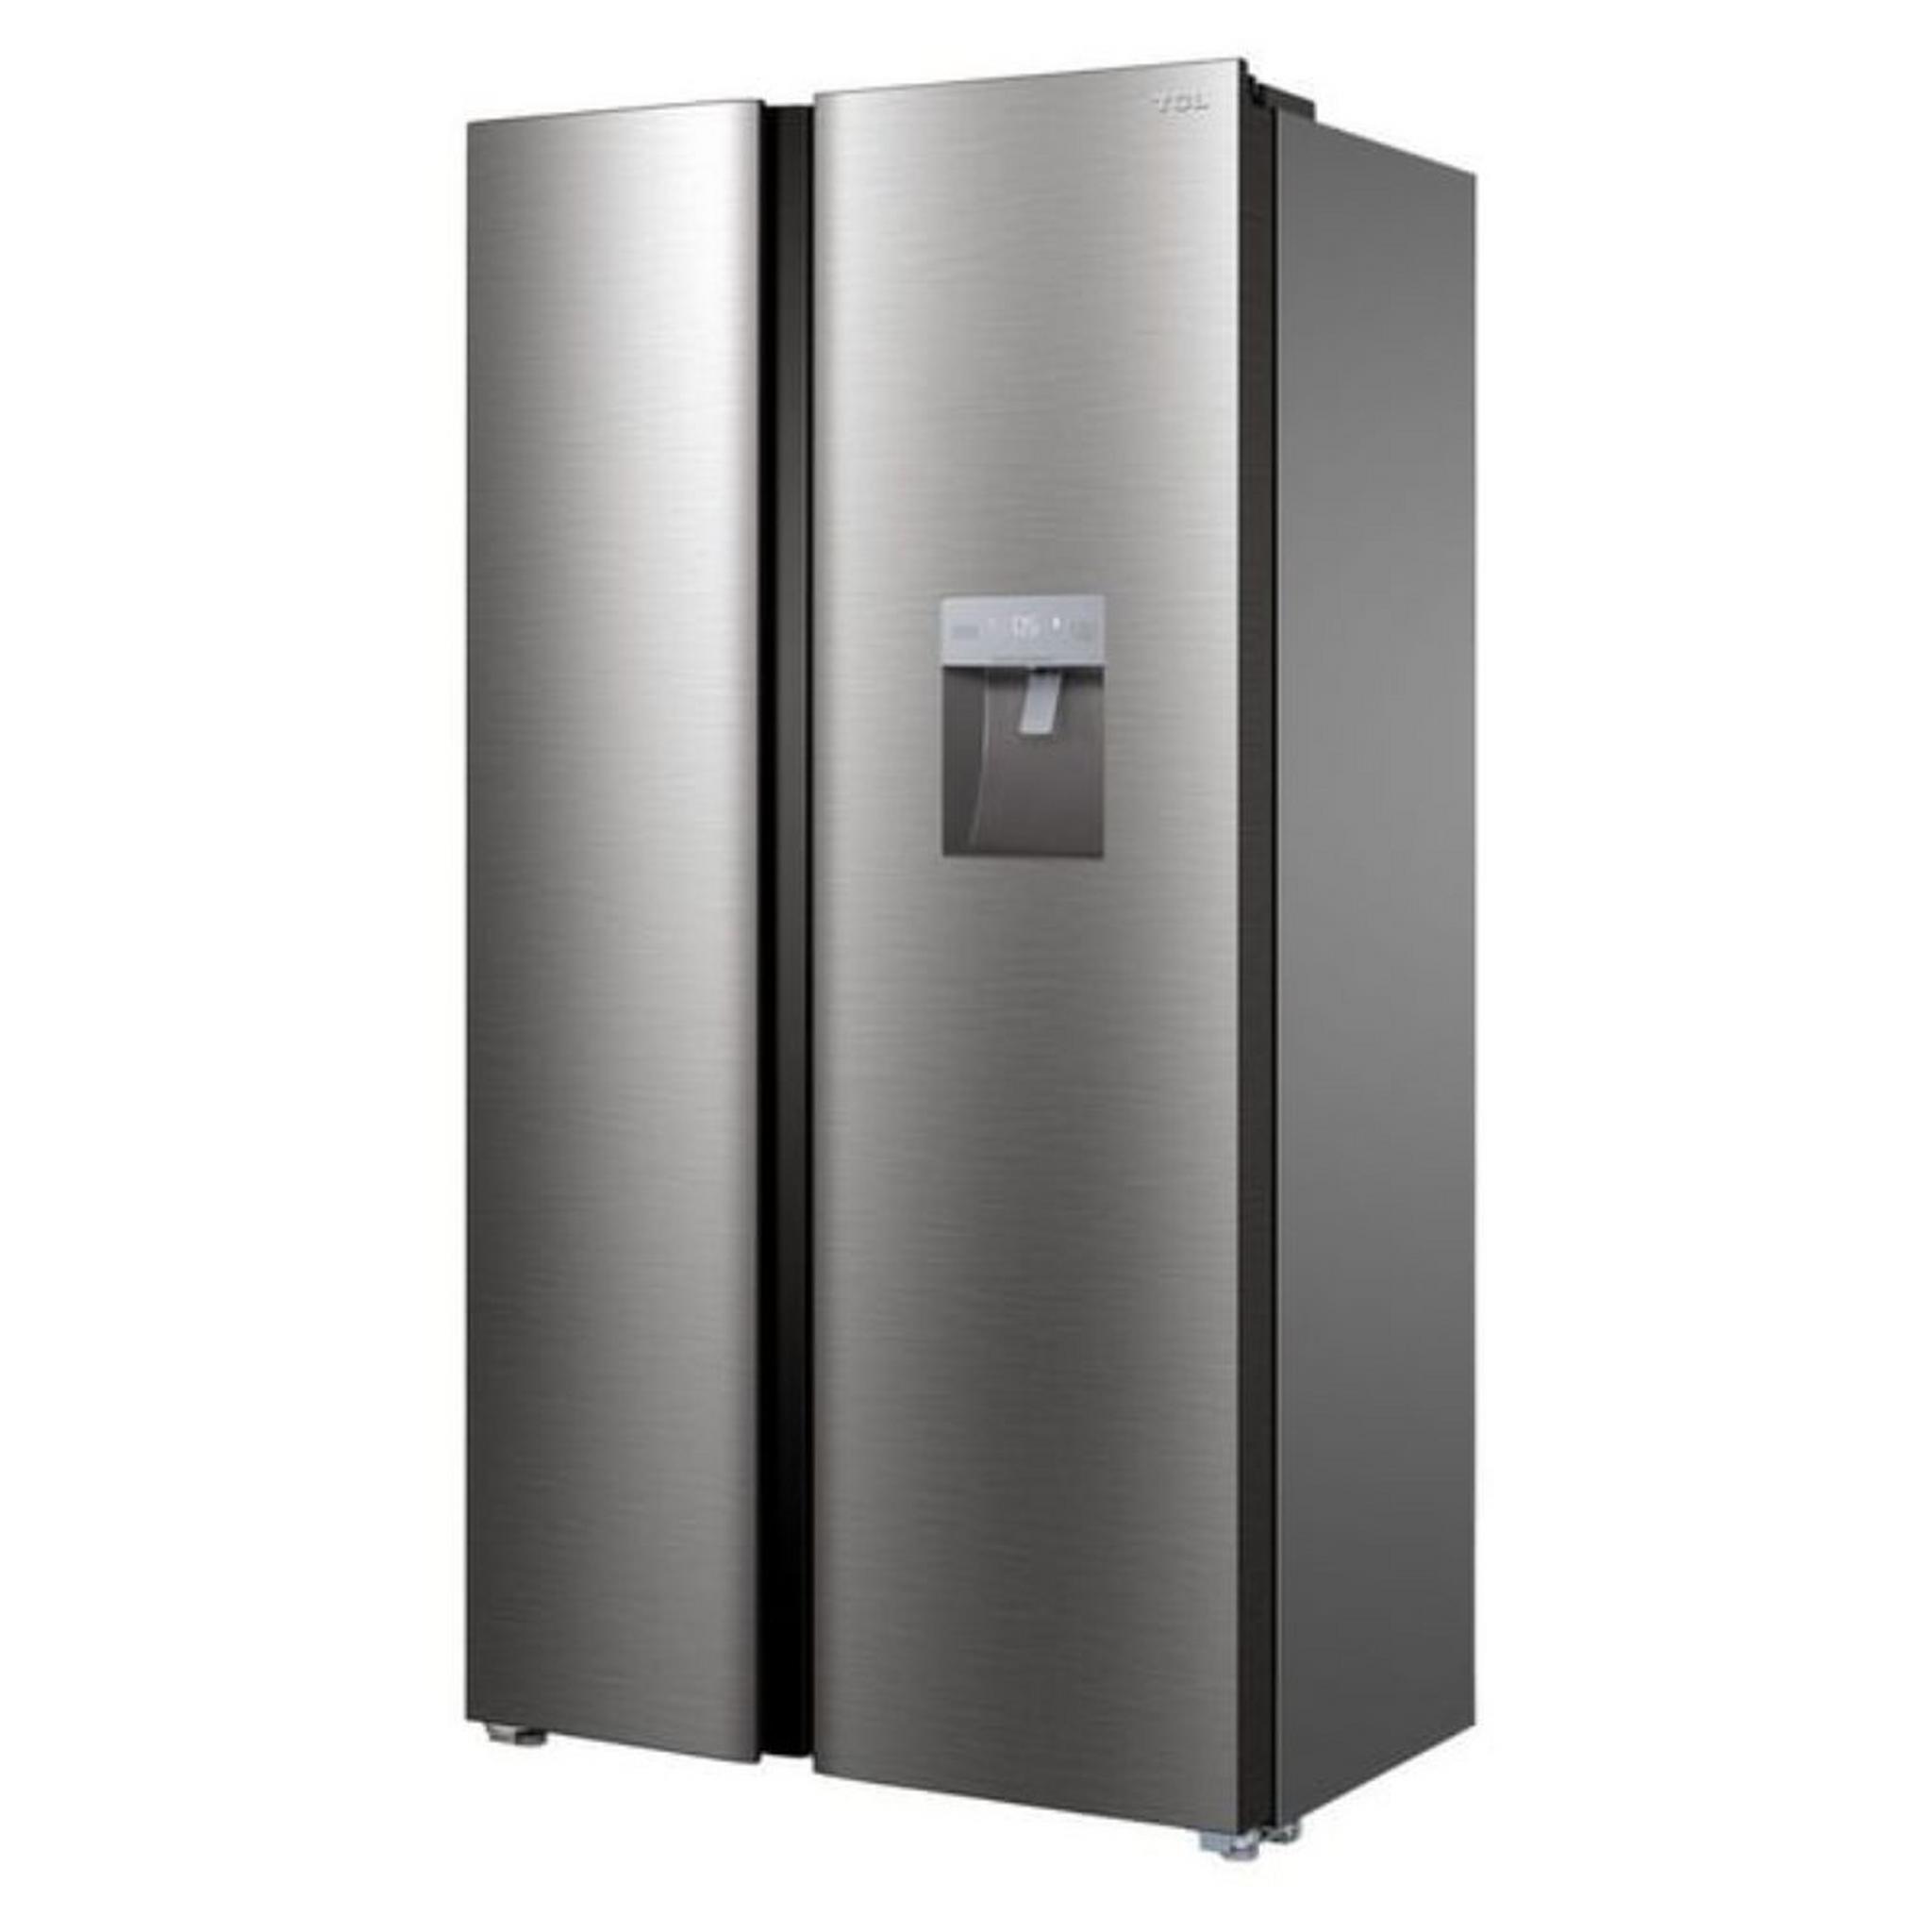 TCL Side by Side Refrigerator, 28 CFT, 790 Liters Capacity, P790SBSNWD – Inox